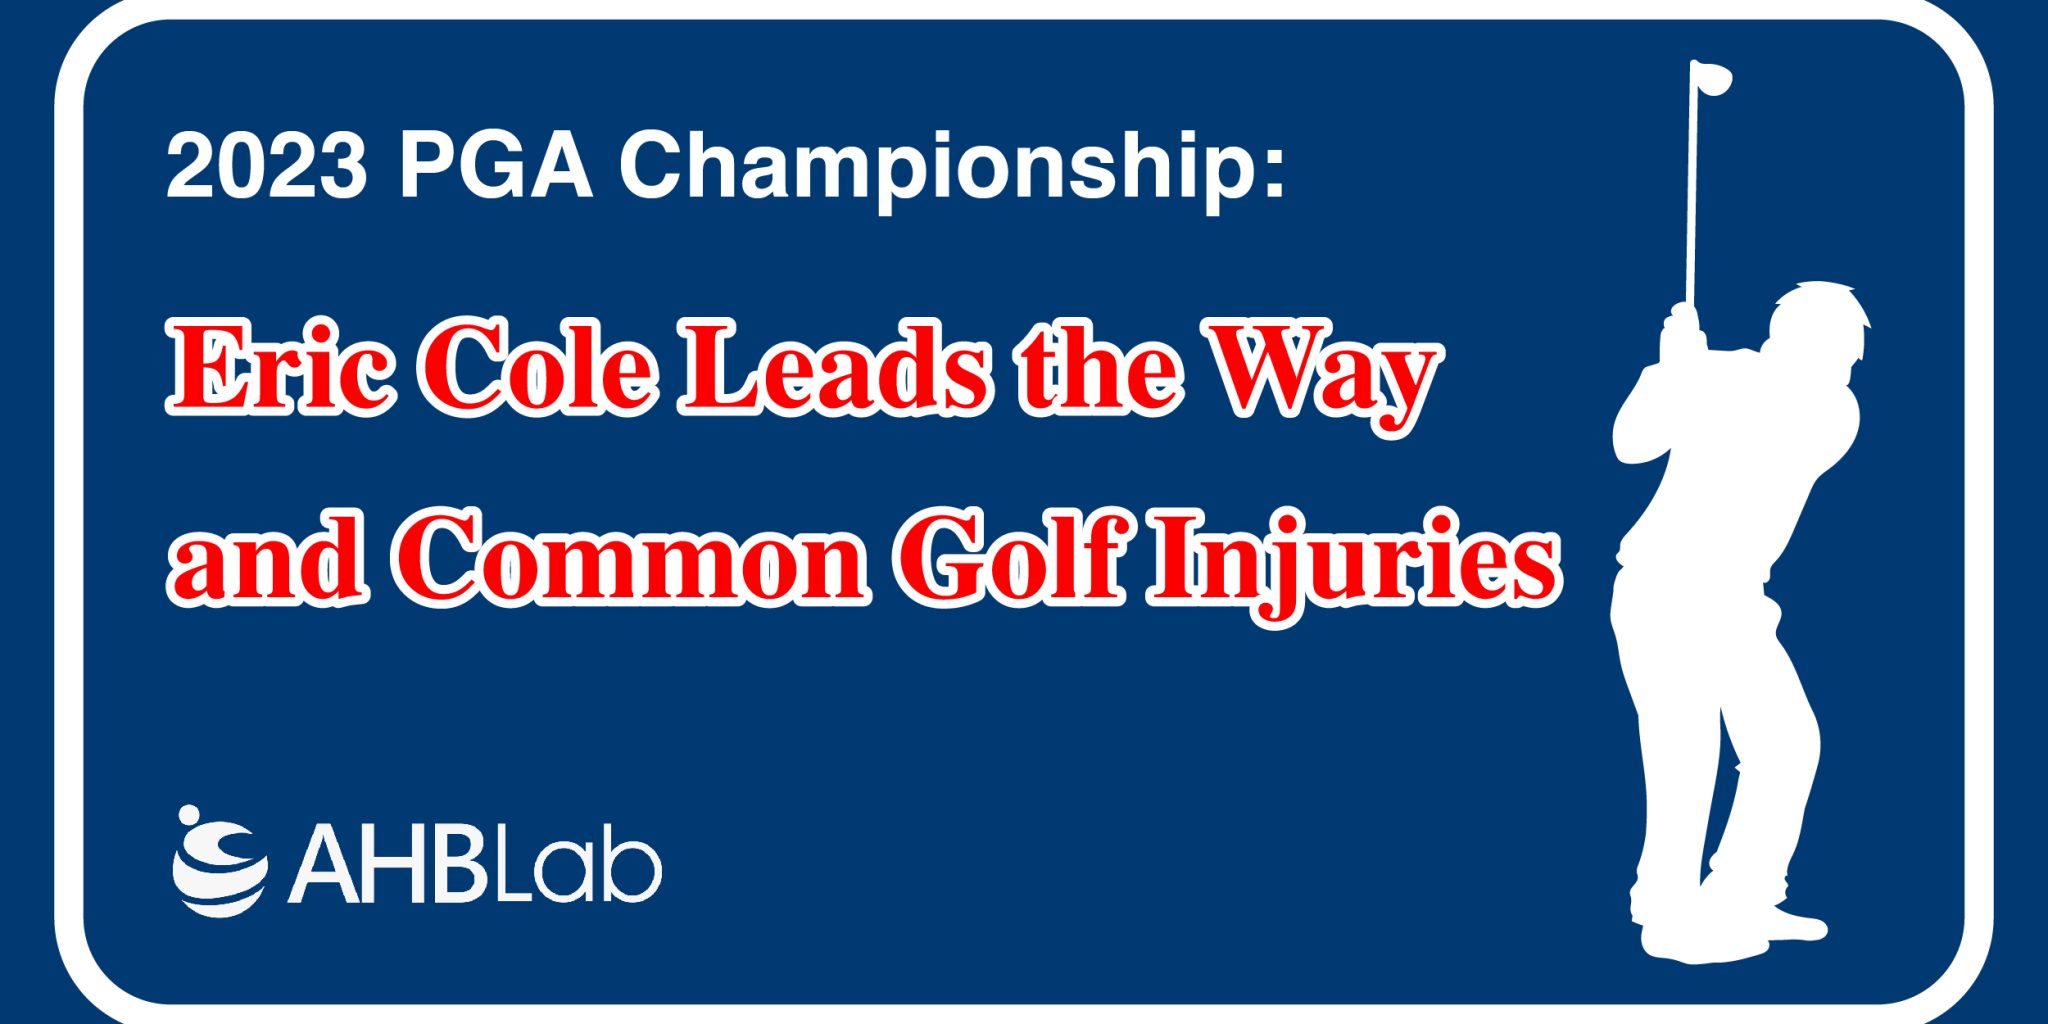 Eric Cole Leads the Way and Common Golf Injuries